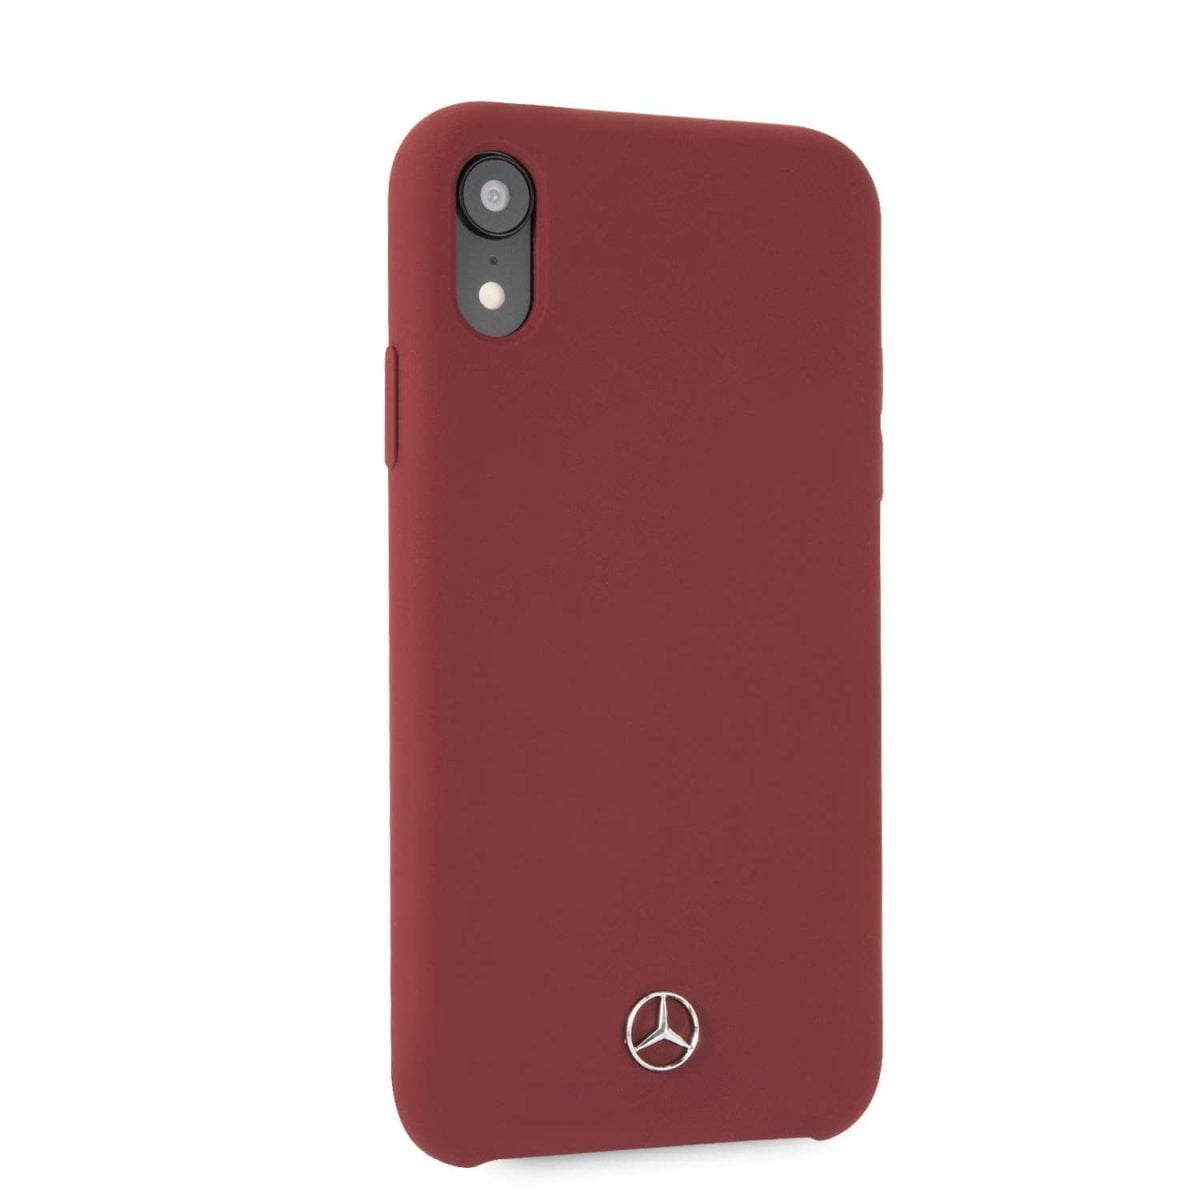 Mercedes Benz Iphone Xr Liquid Silicone Case With Microfiber Lining Red Drop Protection Easily Accessible Ports Officially Licensed 04 &Lt;H1&Gt;Iphone Xs Liquid Silicone Case With Microfiber Lining Red (Mercedes-Benz)&Lt;/H1&Gt; &Lt;Span Class=&Quot;Y2Iqfc&Quot; Lang=&Quot;En&Quot;&Gt;Mercedes-Benz Pattern Ii Series. The Minimalist And Captivating Aesthetics Of Mercedes-Benz Interior Design Have Been Transferred Silicon. They Guarantee A Unique Look And Safety For Your Phone. - Silicon Case With A Metallic Mercedes-Benz Logo Has A 3D Effect - The Unique Finish Enhances The Look And Quality Of This Case - Designed With Easy Access To Ports And Buttons - Case Compatible With Wireless Chargers Collection: Pattern Line Twister Type: Hardcase Material:silicon Red  Compatibility: Iphone X / Xs Product Manufactured Under License From Mercedes-Benz.&Lt;/Span&Gt; Iphone Silicon Cases Iphone Xs Liquid Silicone Case With Microfiber Lining Red (Mercedes-Benz)